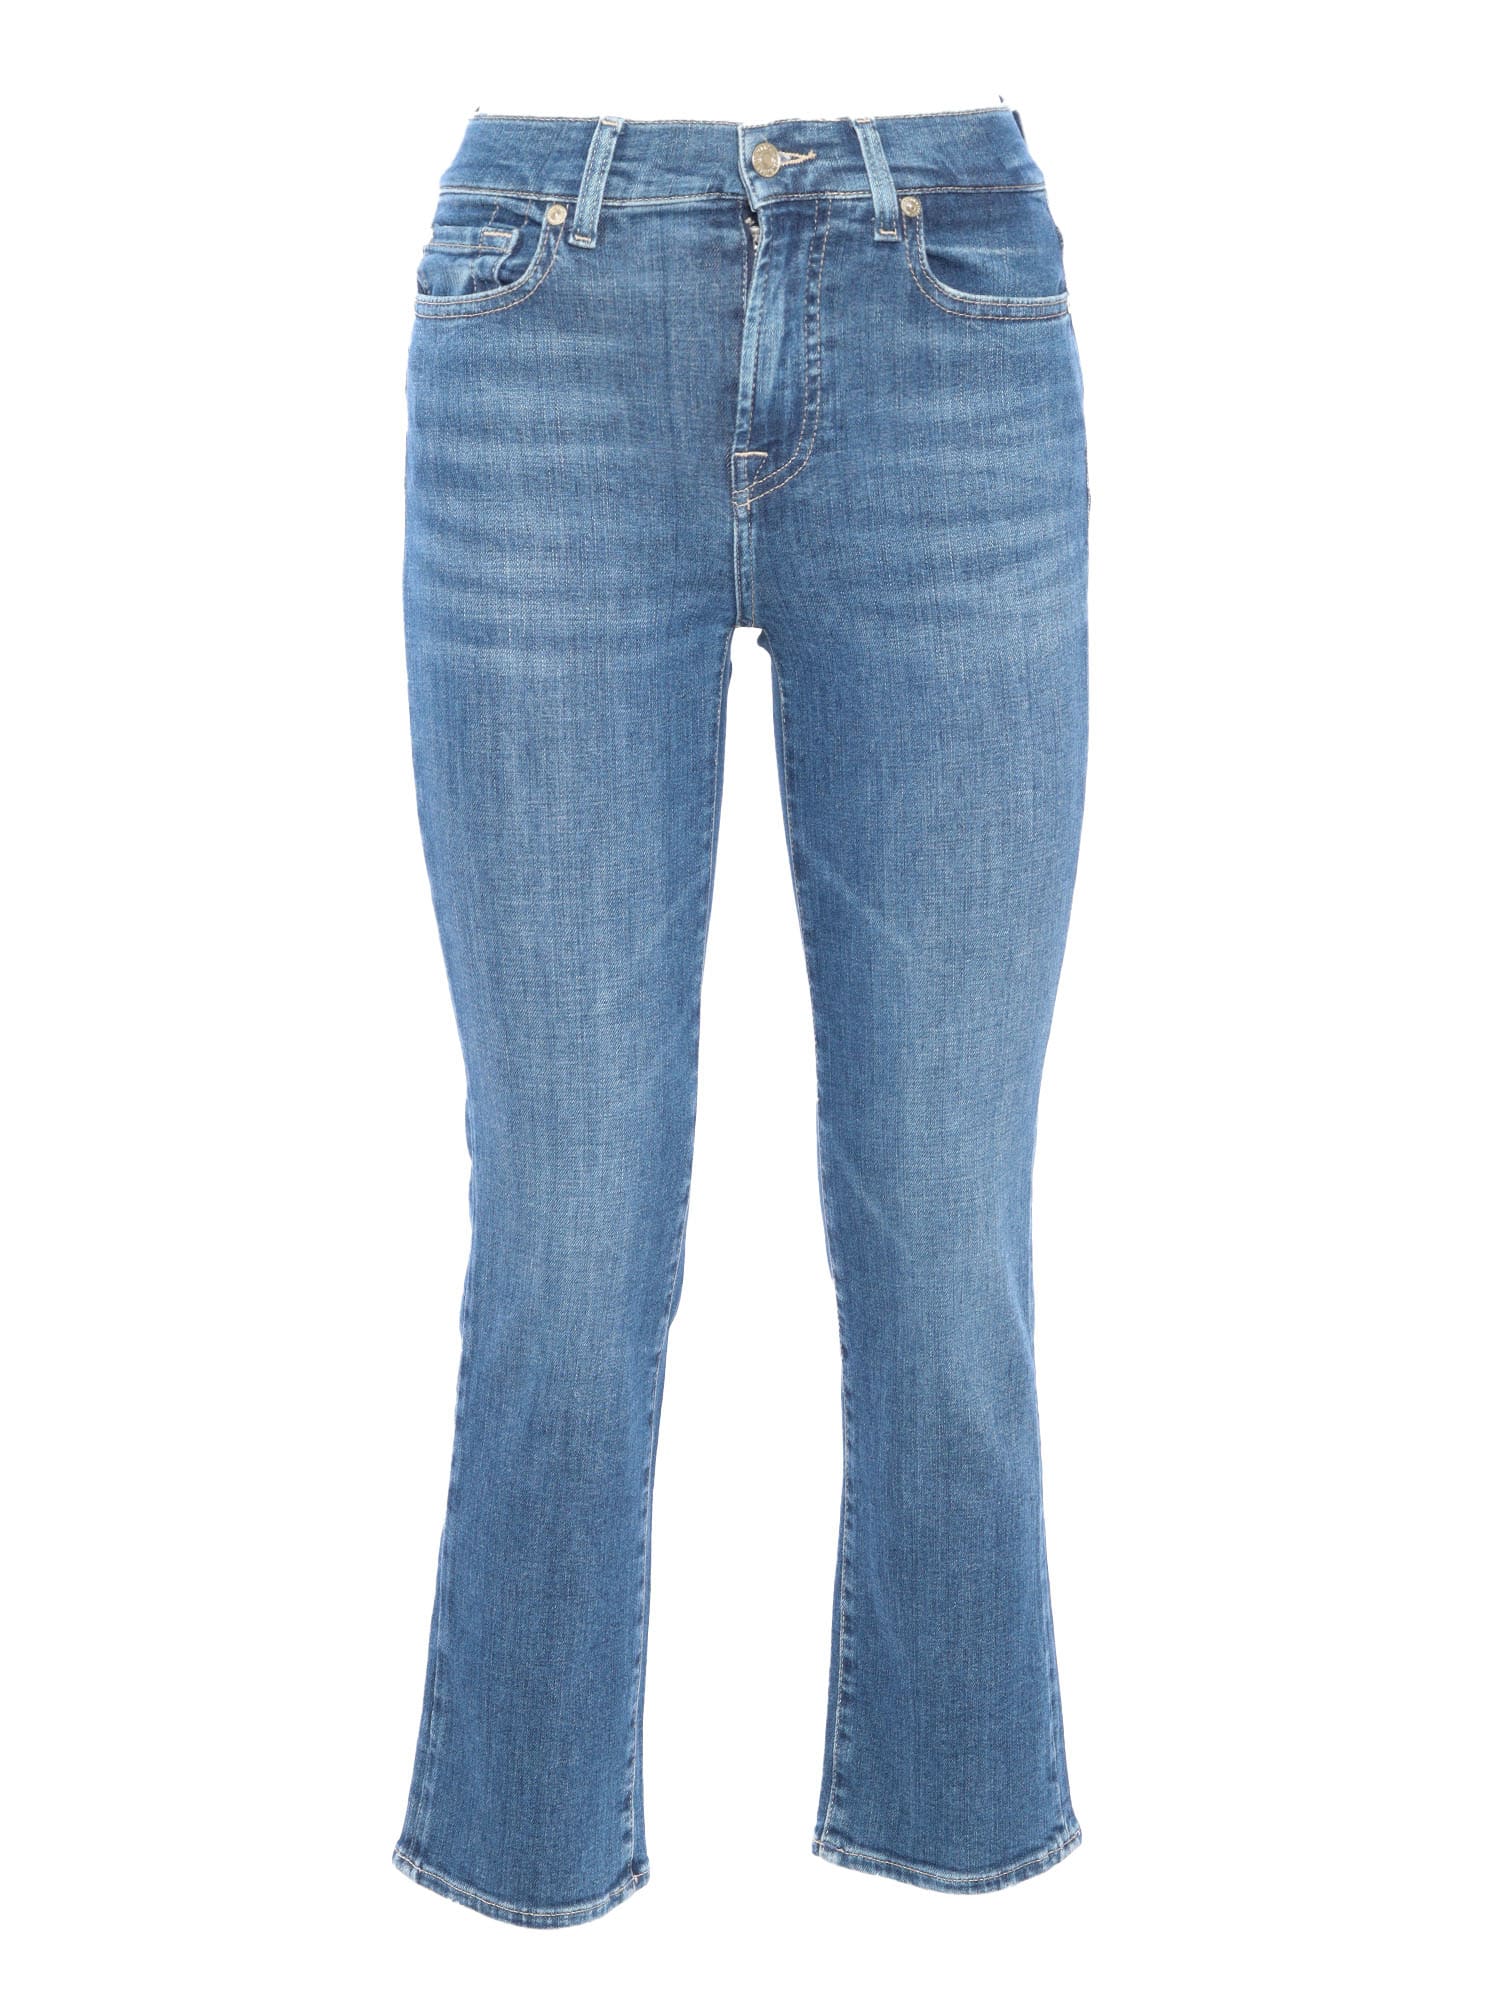 Shop 7 For All Mankind Cropped Womens Jeans. In Blue